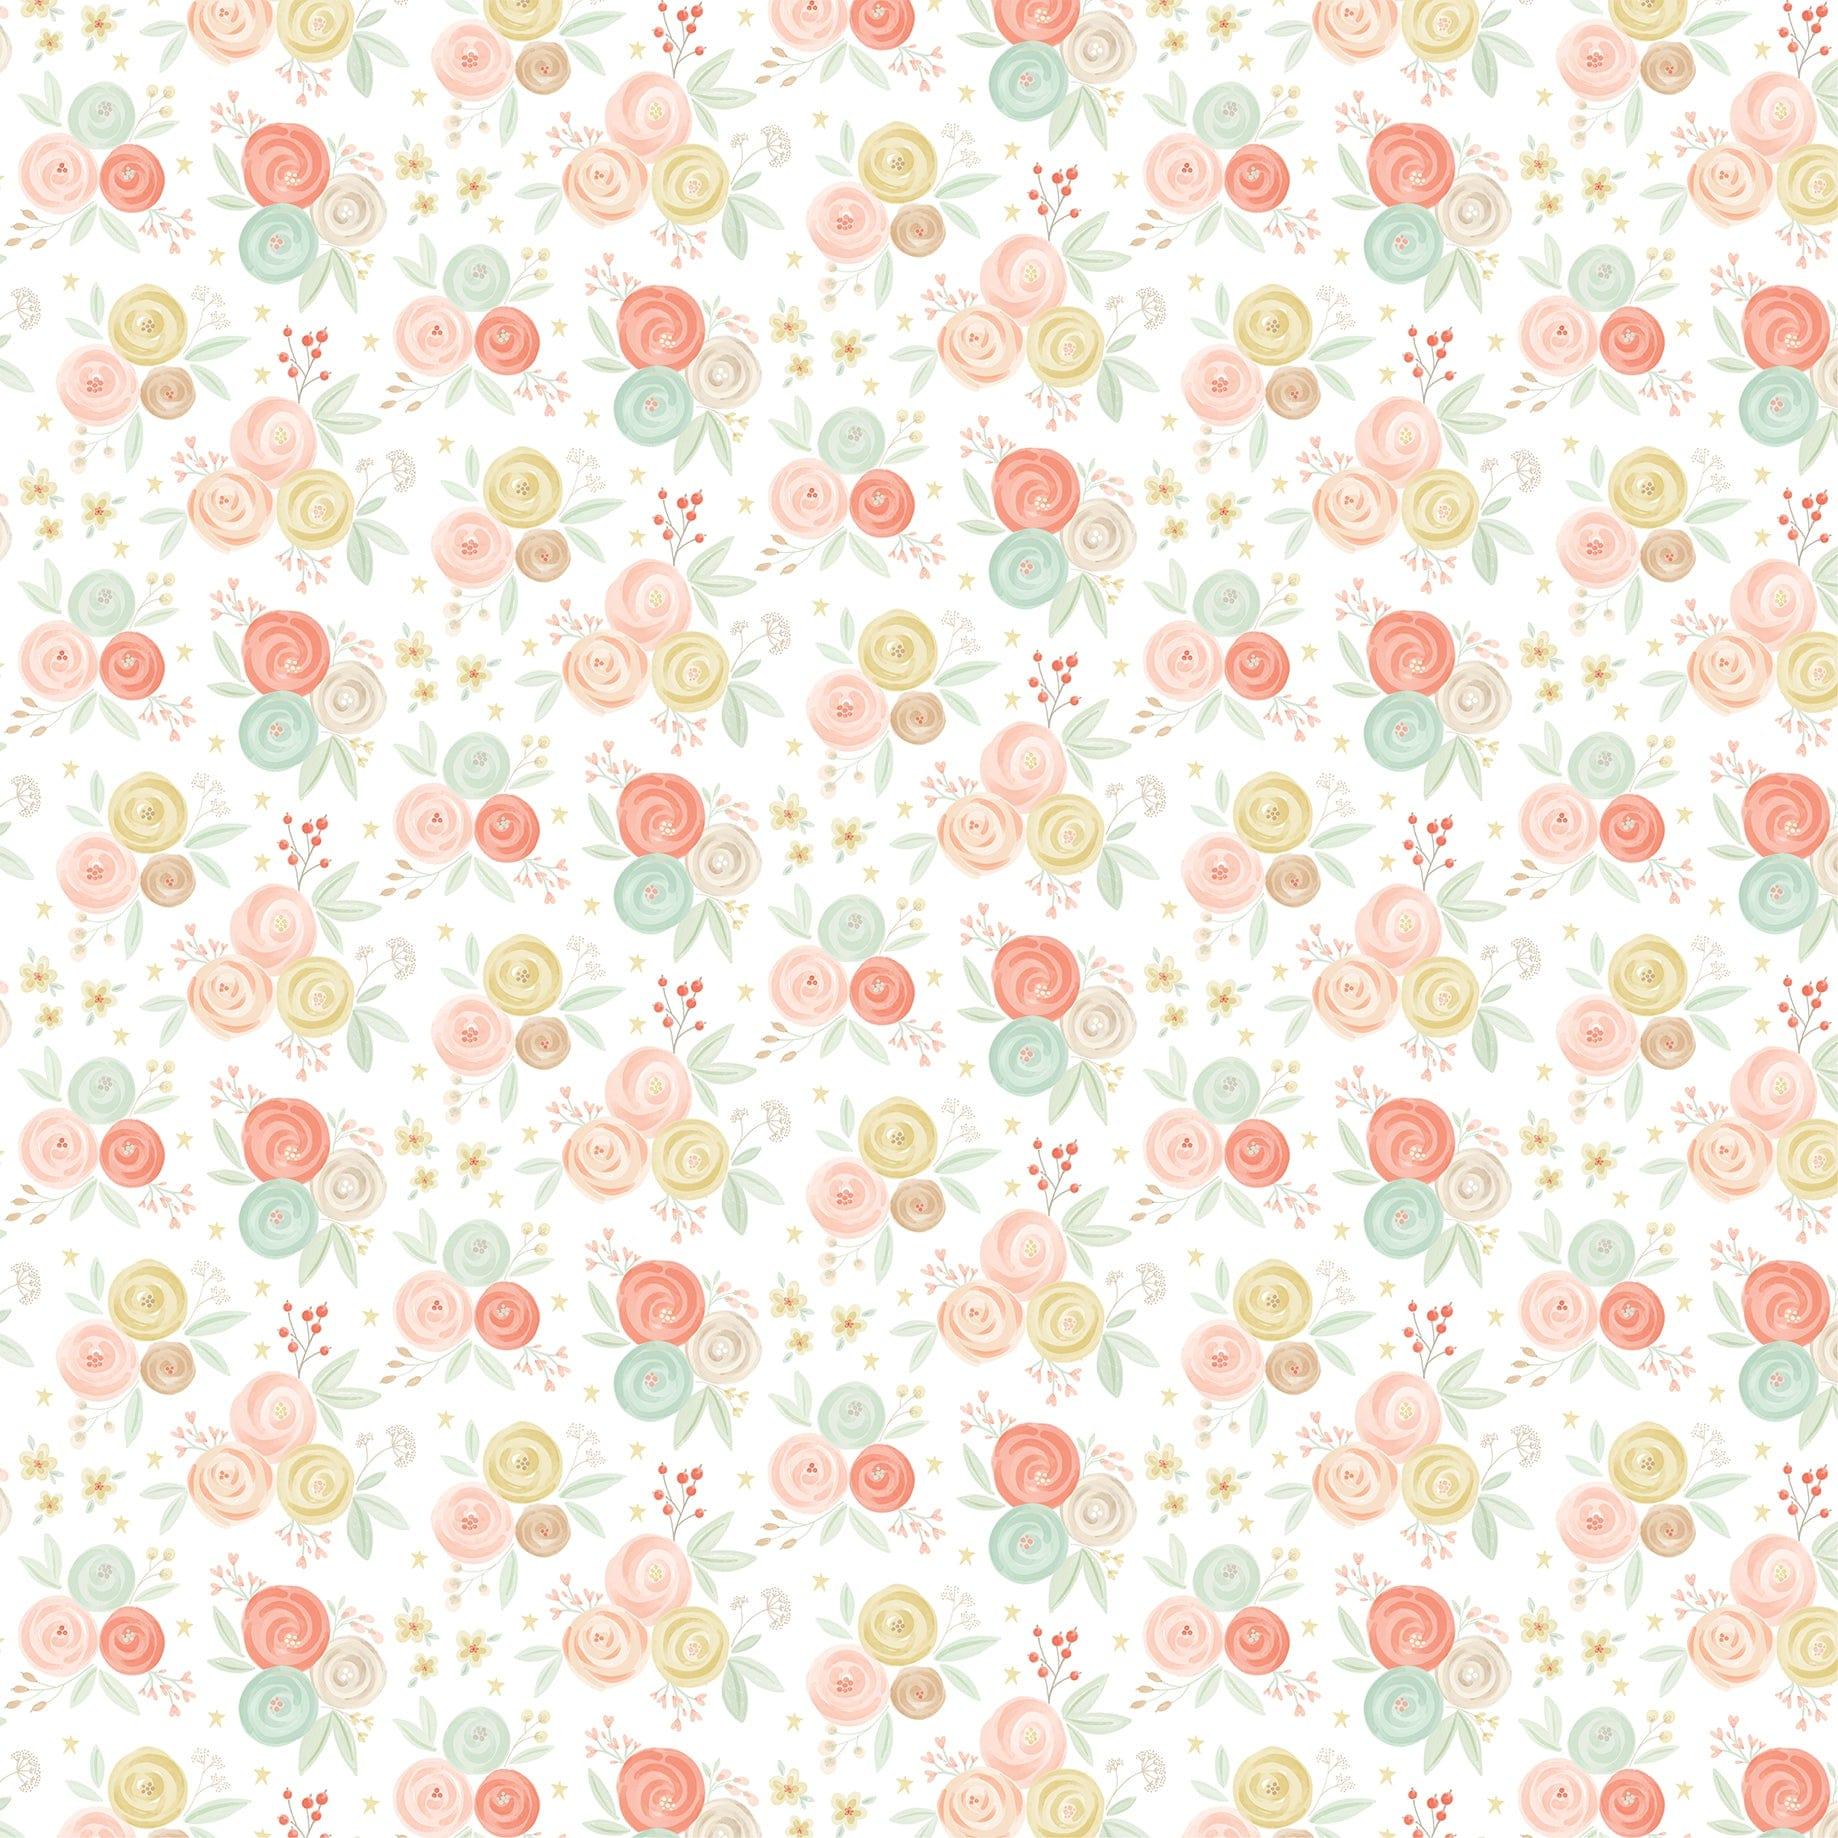 It's A Girl Collection Nursery Room Flowers 12 x 12 Double-Sided Scrapbook Paper by Echo Park Paper - Scrapbook Supply Companies